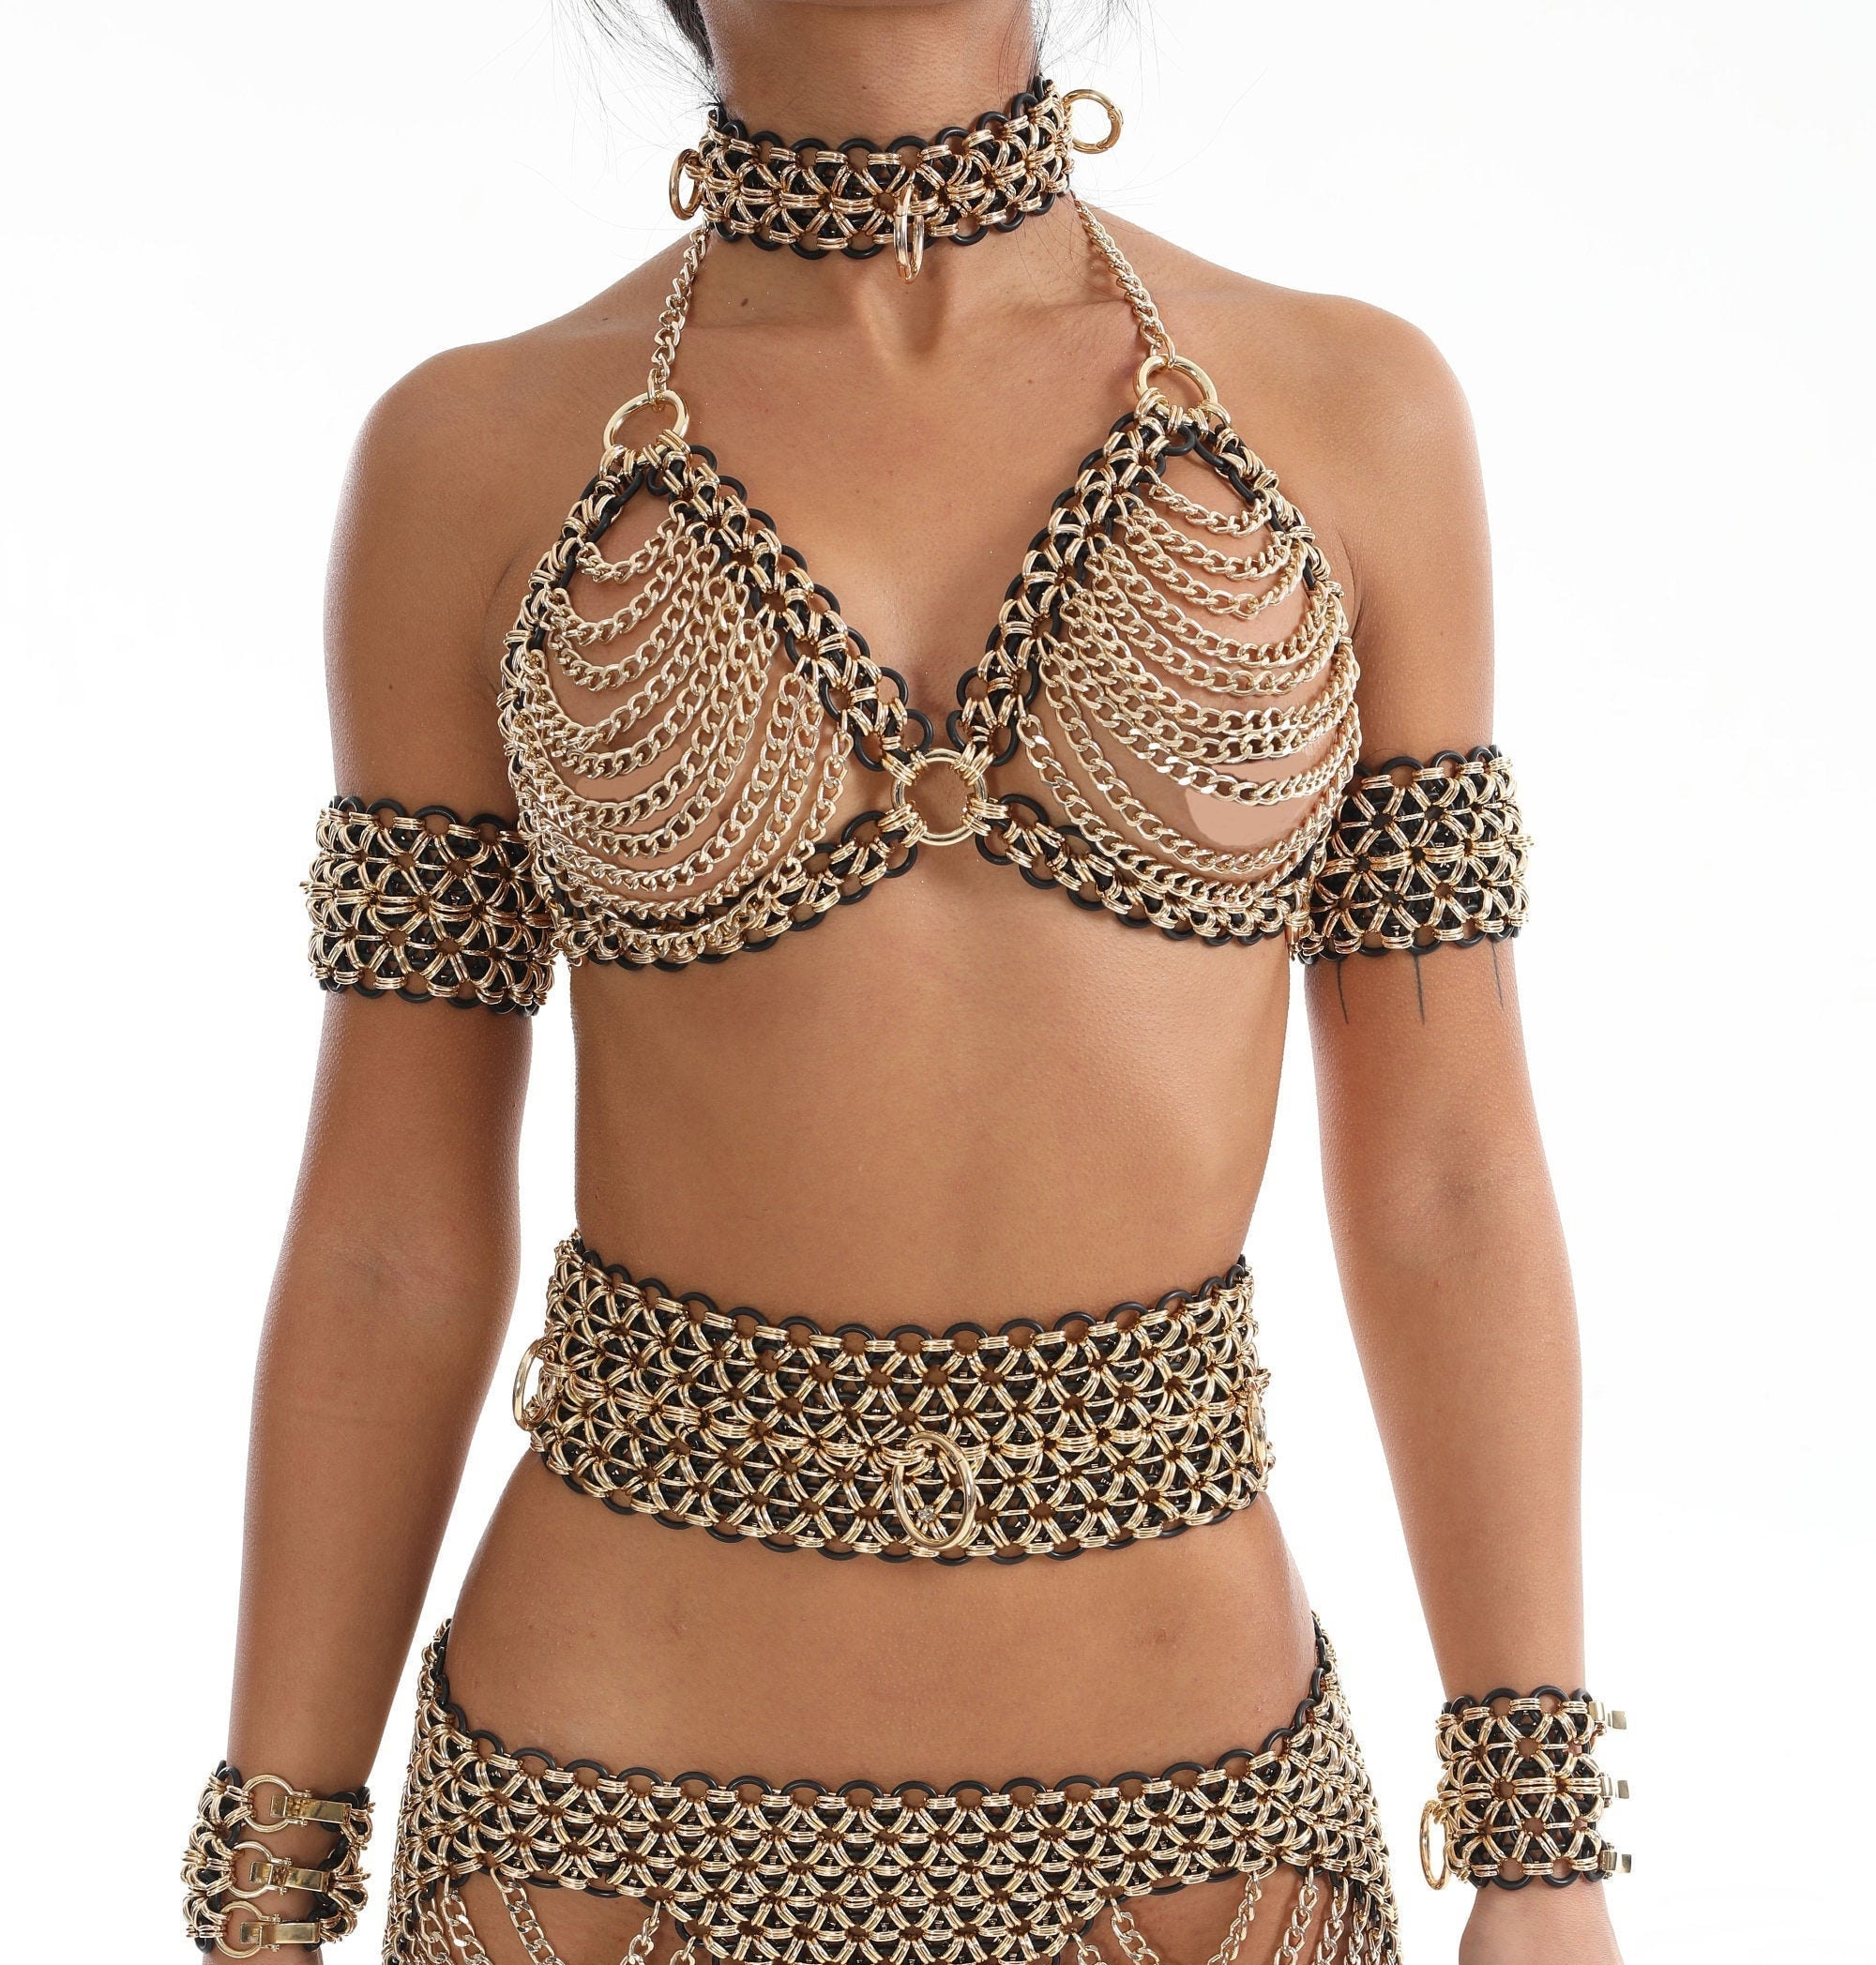 Chain Bra Set, Personalized Chainmail, Ouvert Bra Top, Cosplay